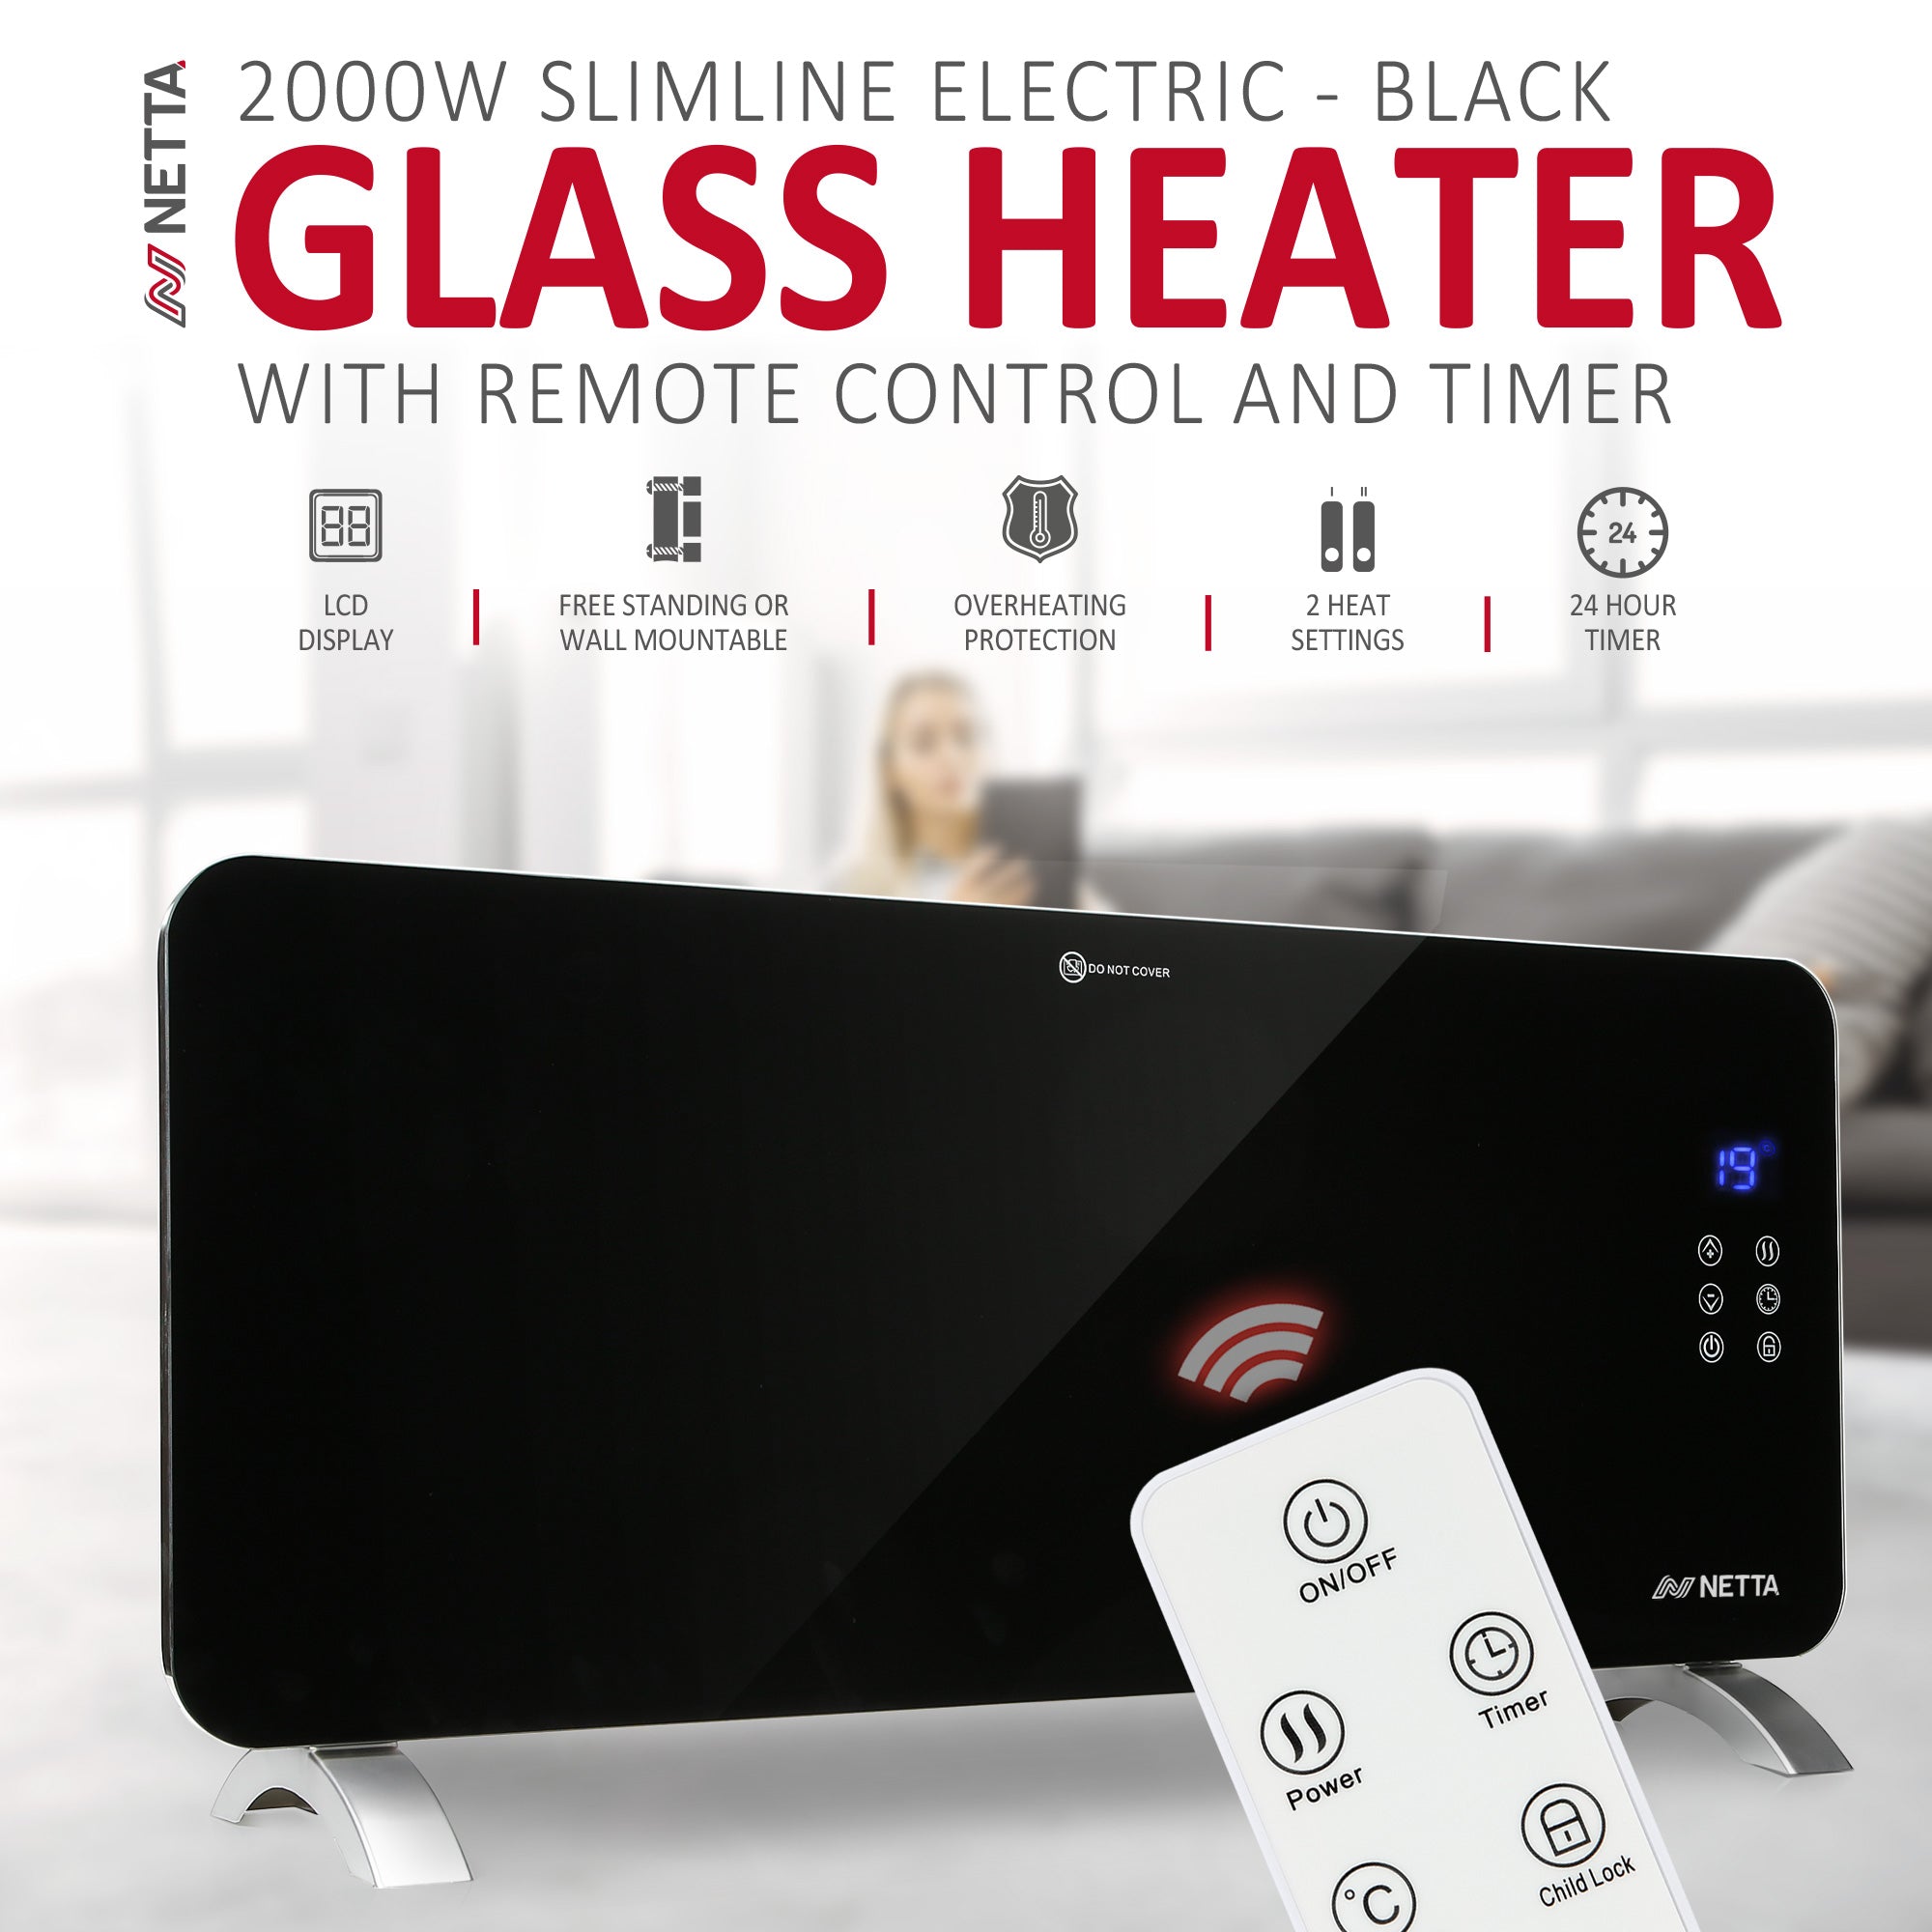 2000W Glass Panel Heater with 24 Hour Timer - Black